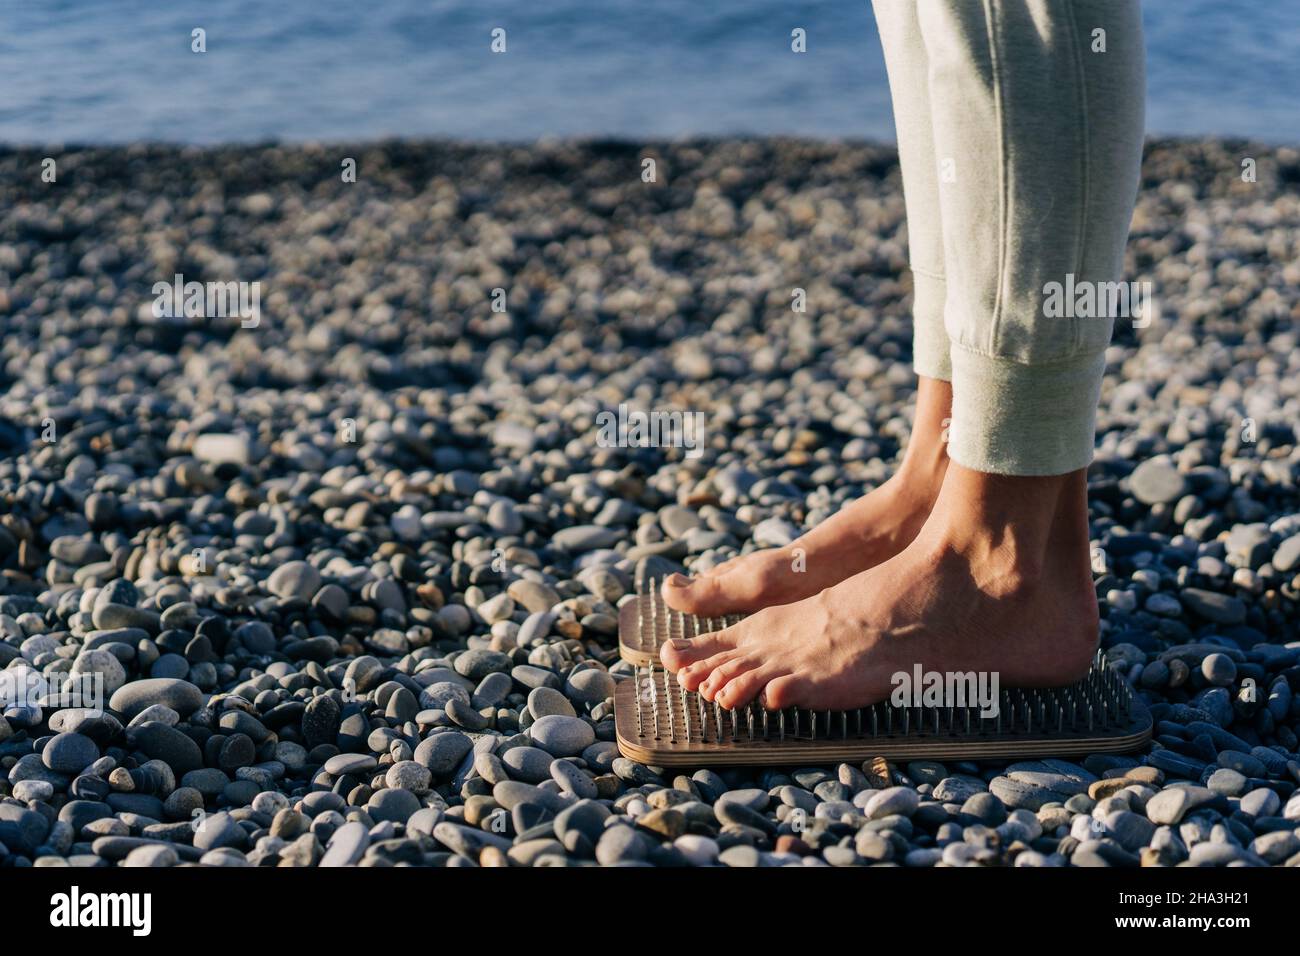 Alternative medicine acupressure, barefoot woman stand on wooden planks with nails on pebbles on the beach. Stock Photo